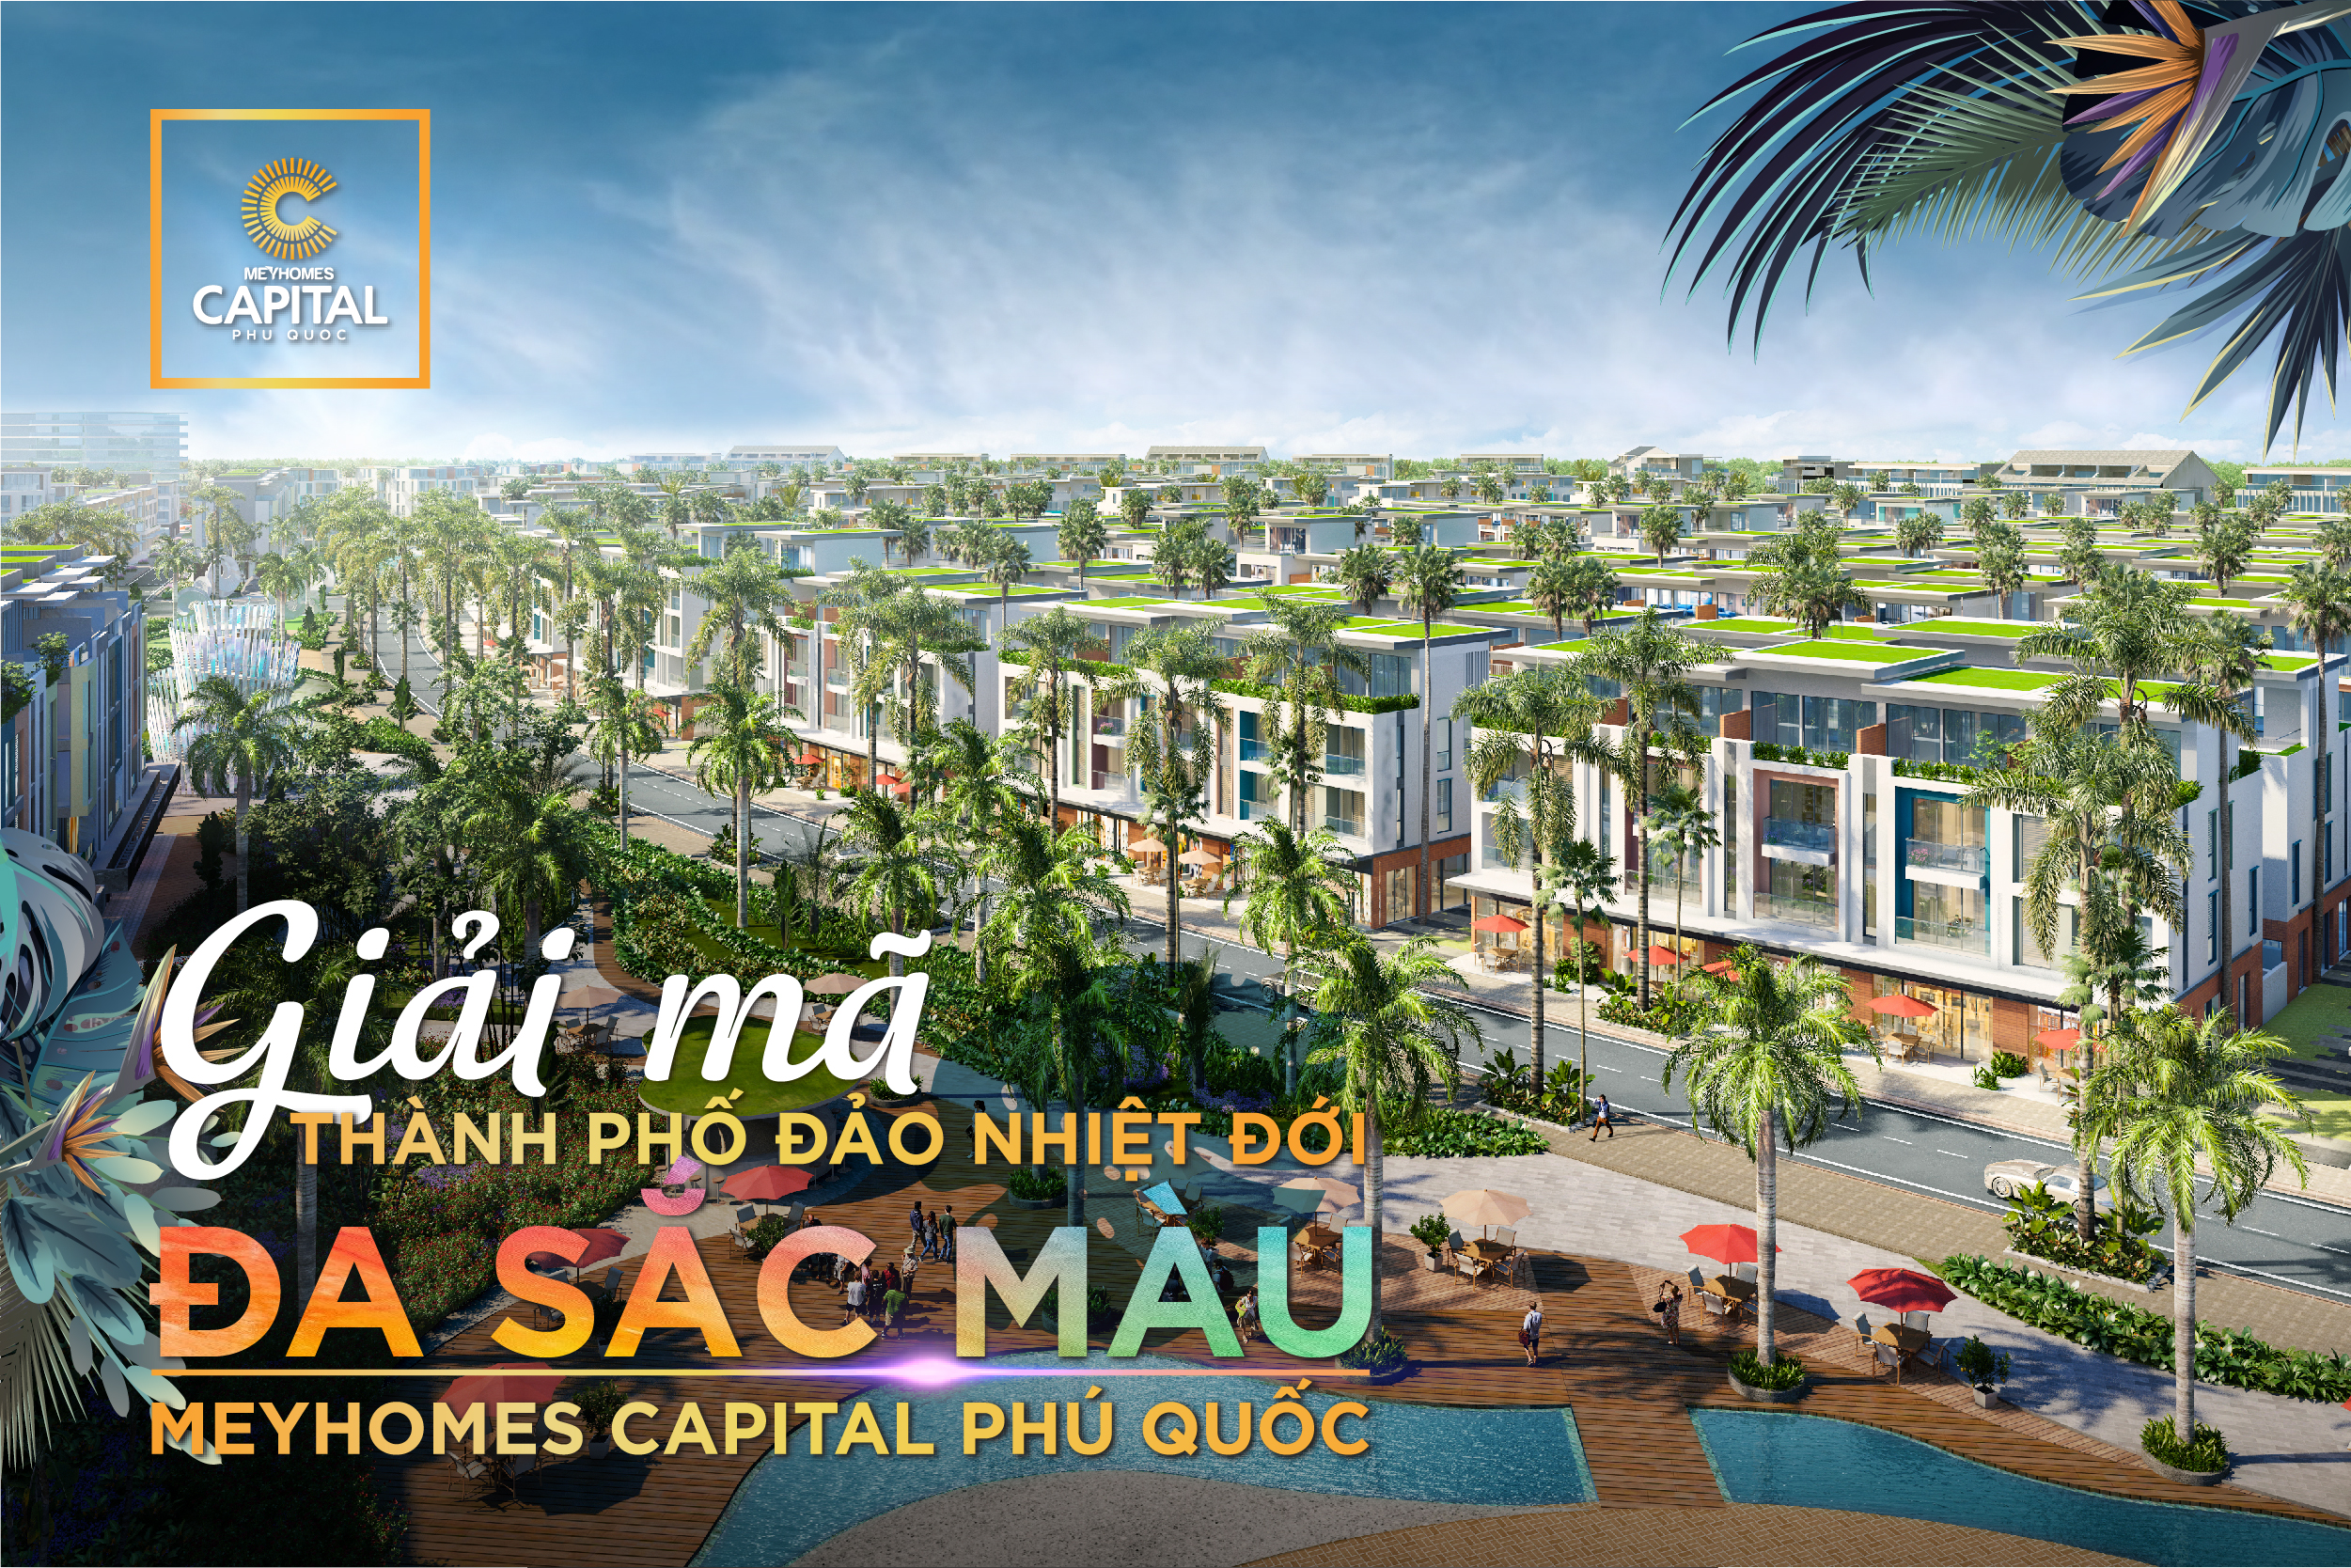 meyhomes-capital-phu-quoc-4